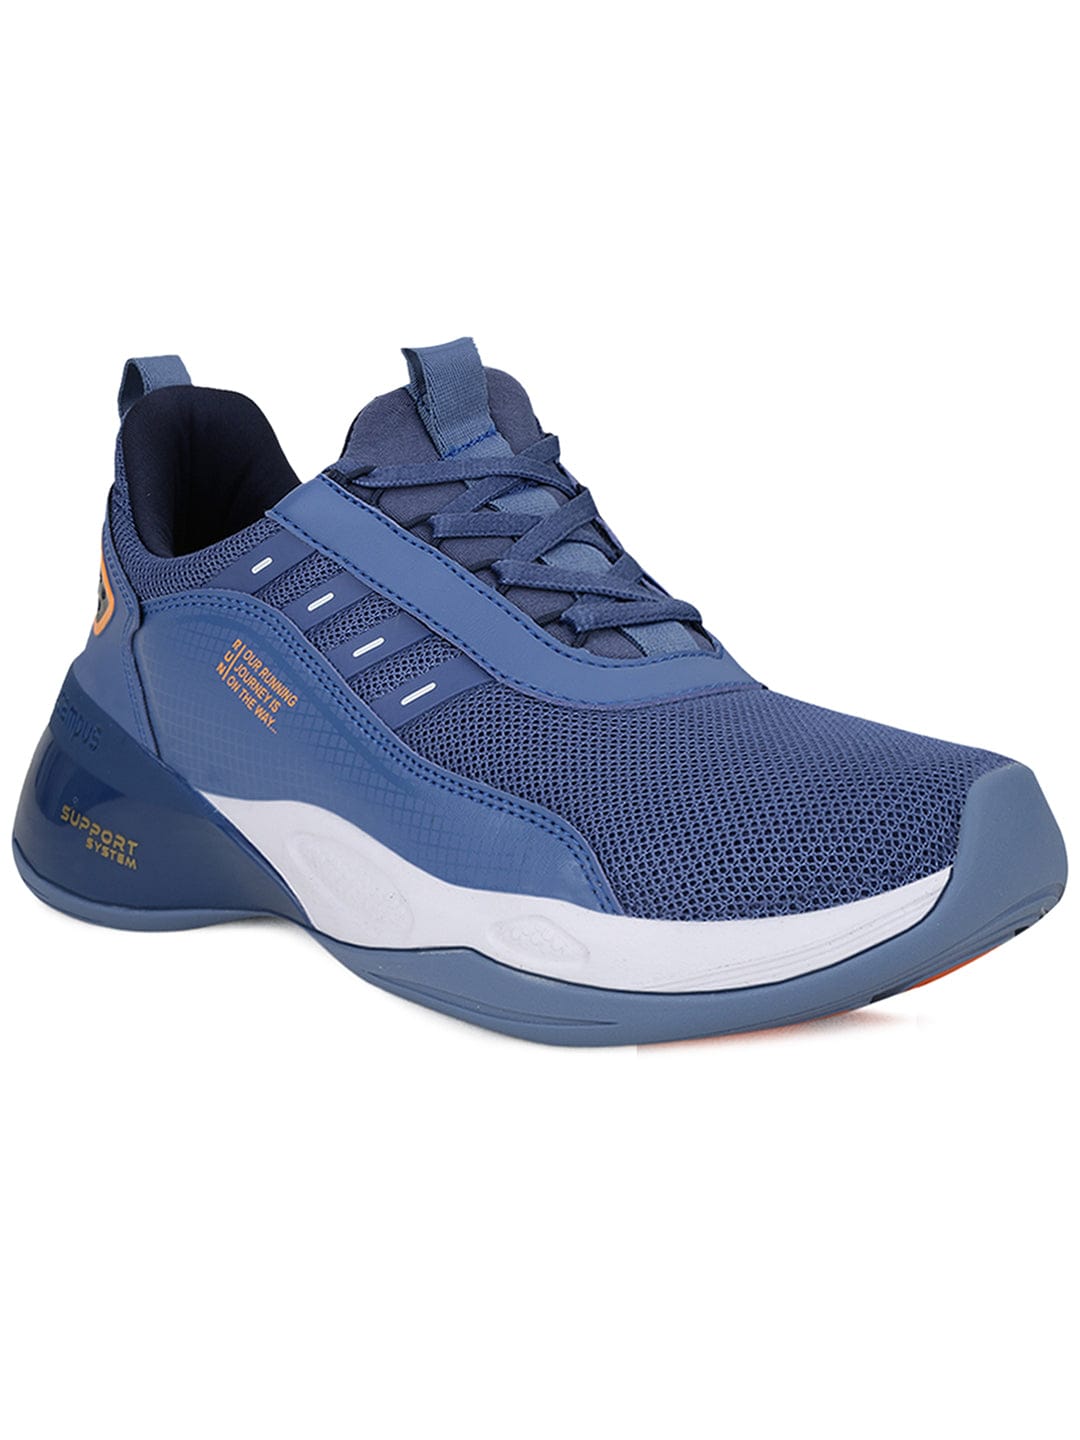 Buy TERMINATOR Blue Men's Running Shoes online | Campus Shoes